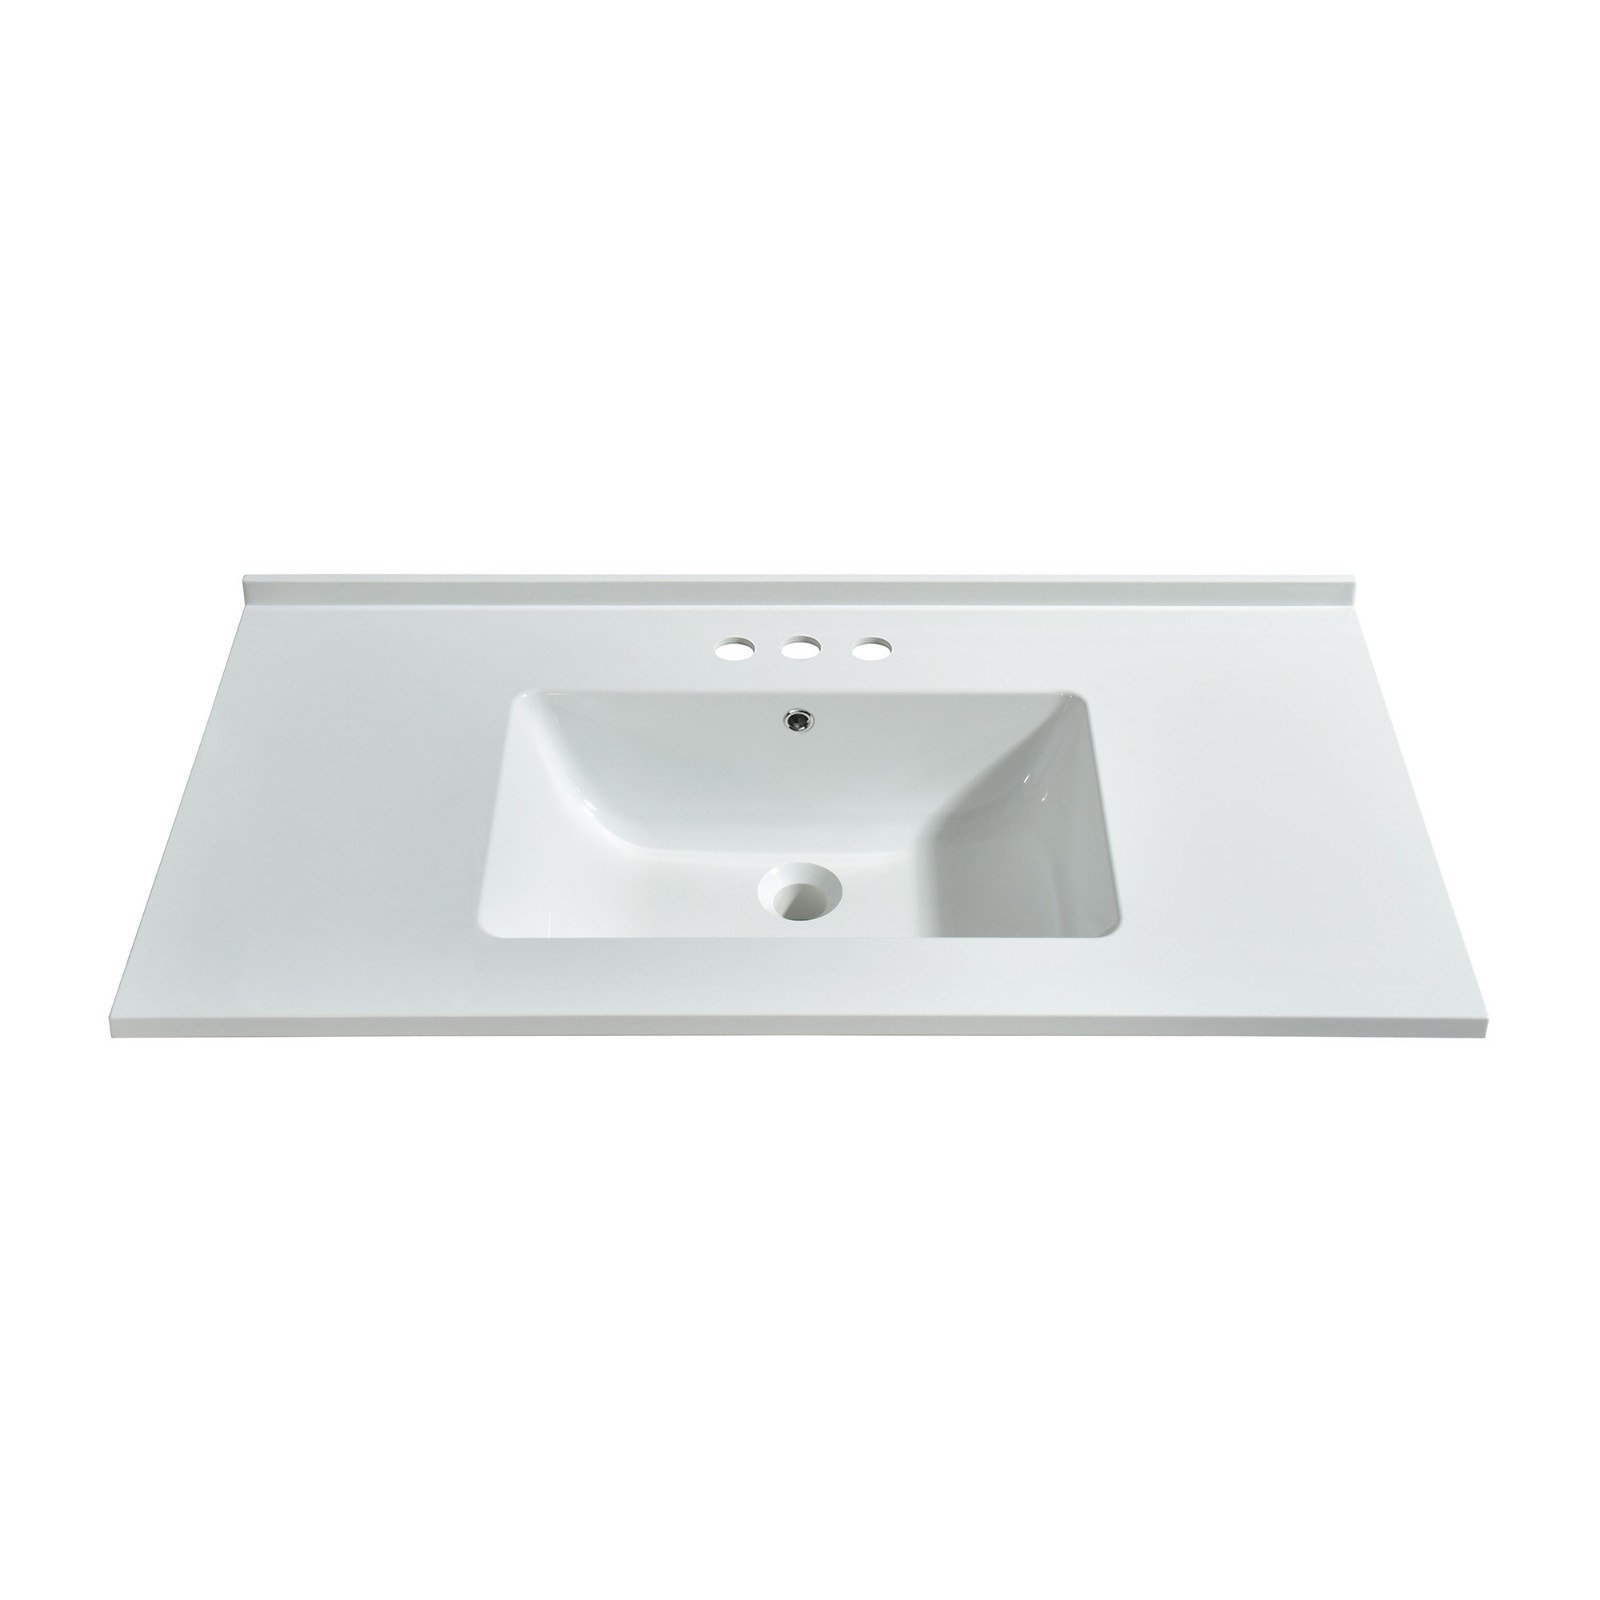  WOODBRIDGE VT4322-1000 Solid Surface Vanity Top with with Intergrated Sink and 3 Faucet Holes for 4-Inch Centerset Faucet, 43